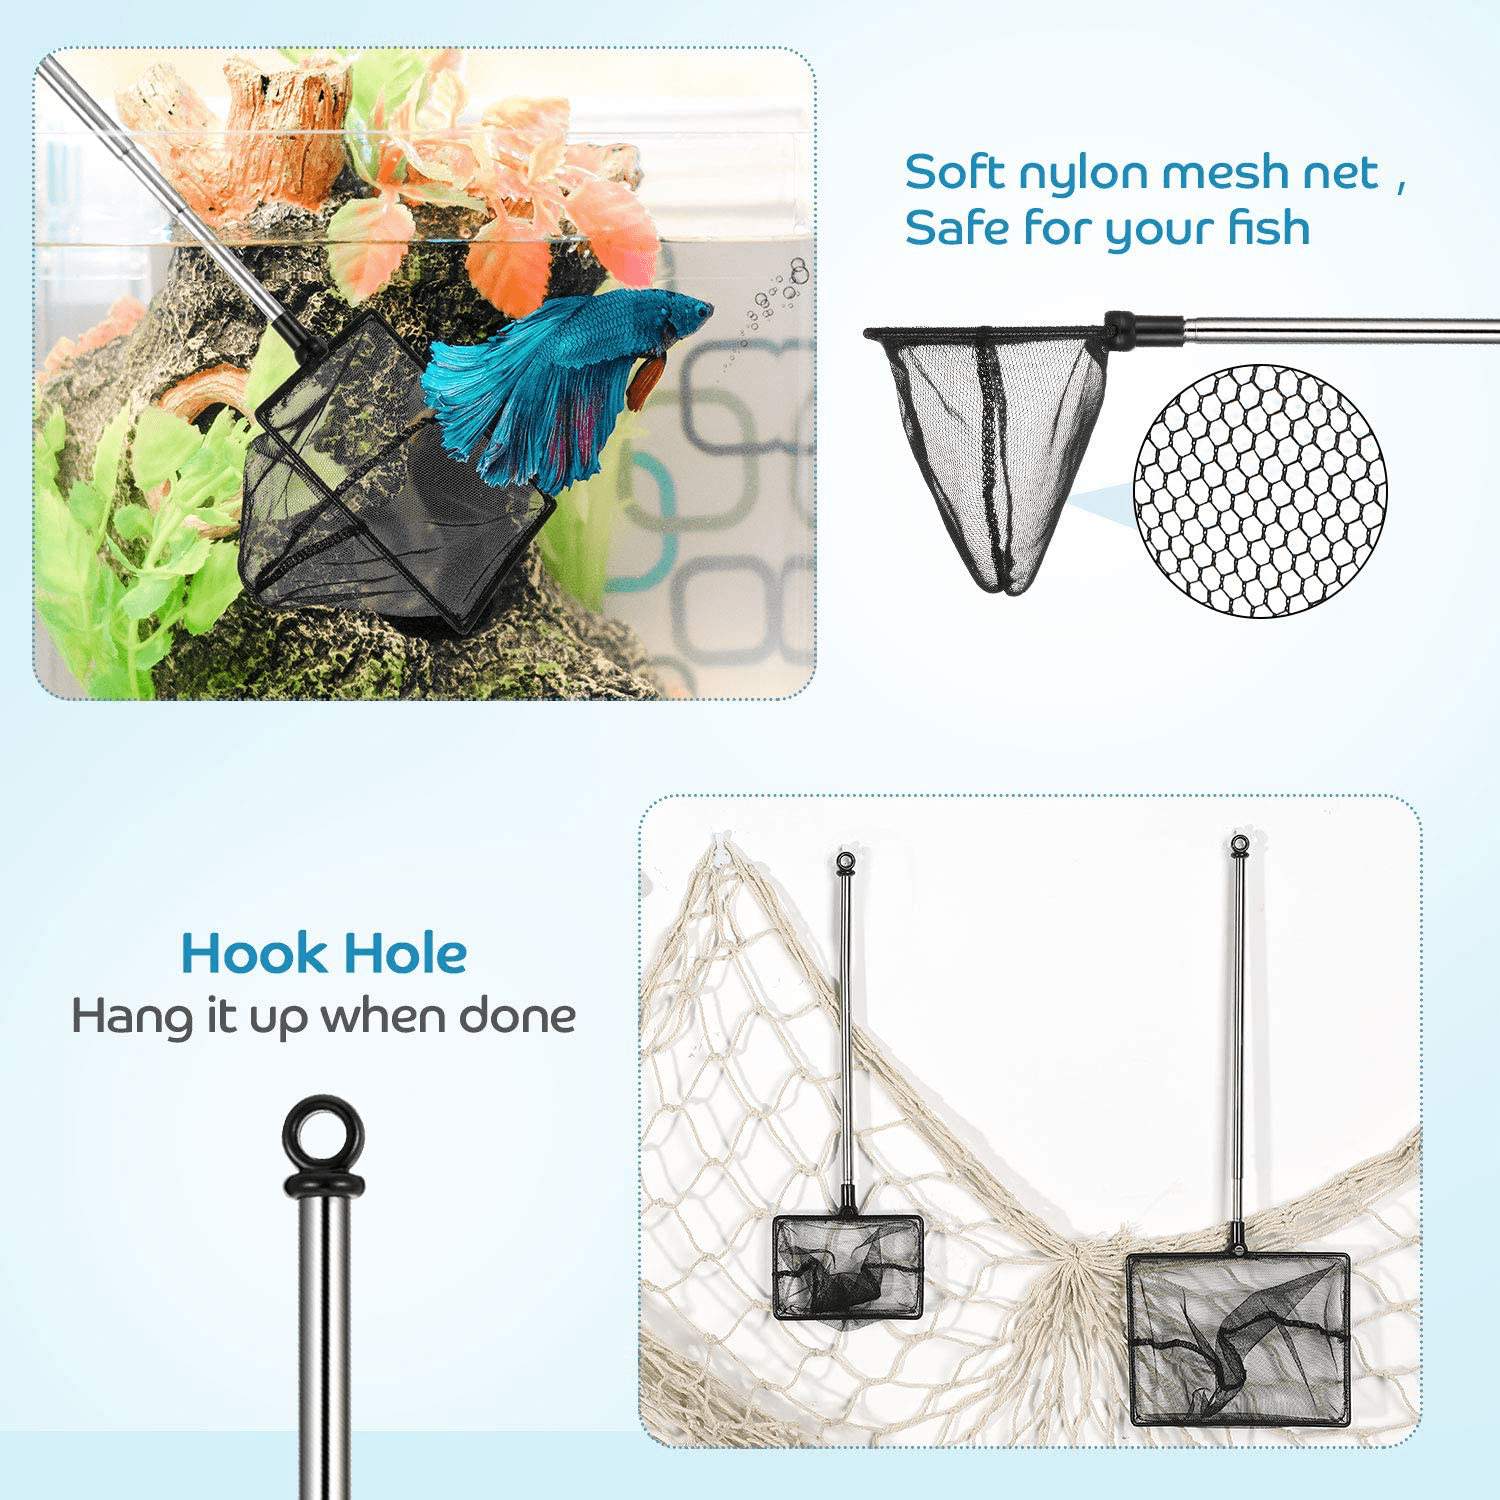 2 Pieces Mesh Fish Tank Net Aquarium Fish Net 4 Inch and 6 Inch Stainless Steel Fish Net with Extendable 12.5-27.5 Inch Long Handle Fish Catch Nets Fish Tank Aquarium Accessories